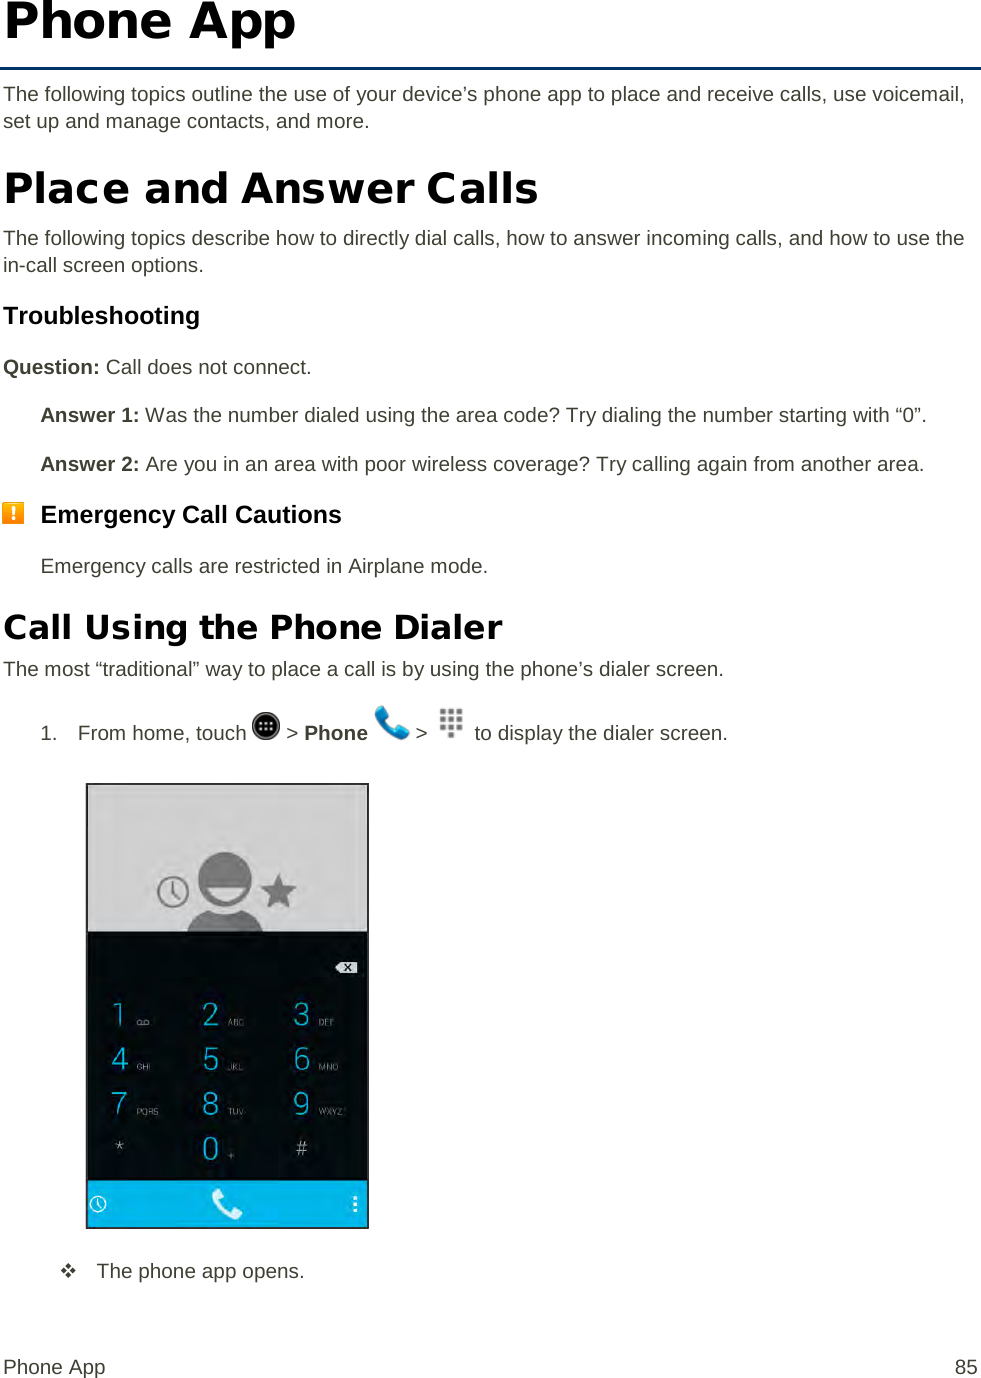 Phone App The following topics outline the use of your device’s phone app to place and receive calls, use voicemail, set up and manage contacts, and more. Place and Answer Calls The following topics describe how to directly dial calls, how to answer incoming calls, and how to use the in-call screen options. Troubleshooting Question: Call does not connect. Answer 1: Was the number dialed using the area code? Try dialing the number starting with “0”. Answer 2: Are you in an area with poor wireless coverage? Try calling again from another area.  Emergency Call Cautions Emergency calls are restricted in Airplane mode. Call Using the Phone Dialer The most “traditional” way to place a call is by using the phone’s dialer screen.  1.  From home, touch   &gt; Phone   &gt;   to display the dialer screen.    The phone app opens.  Phone App 85 